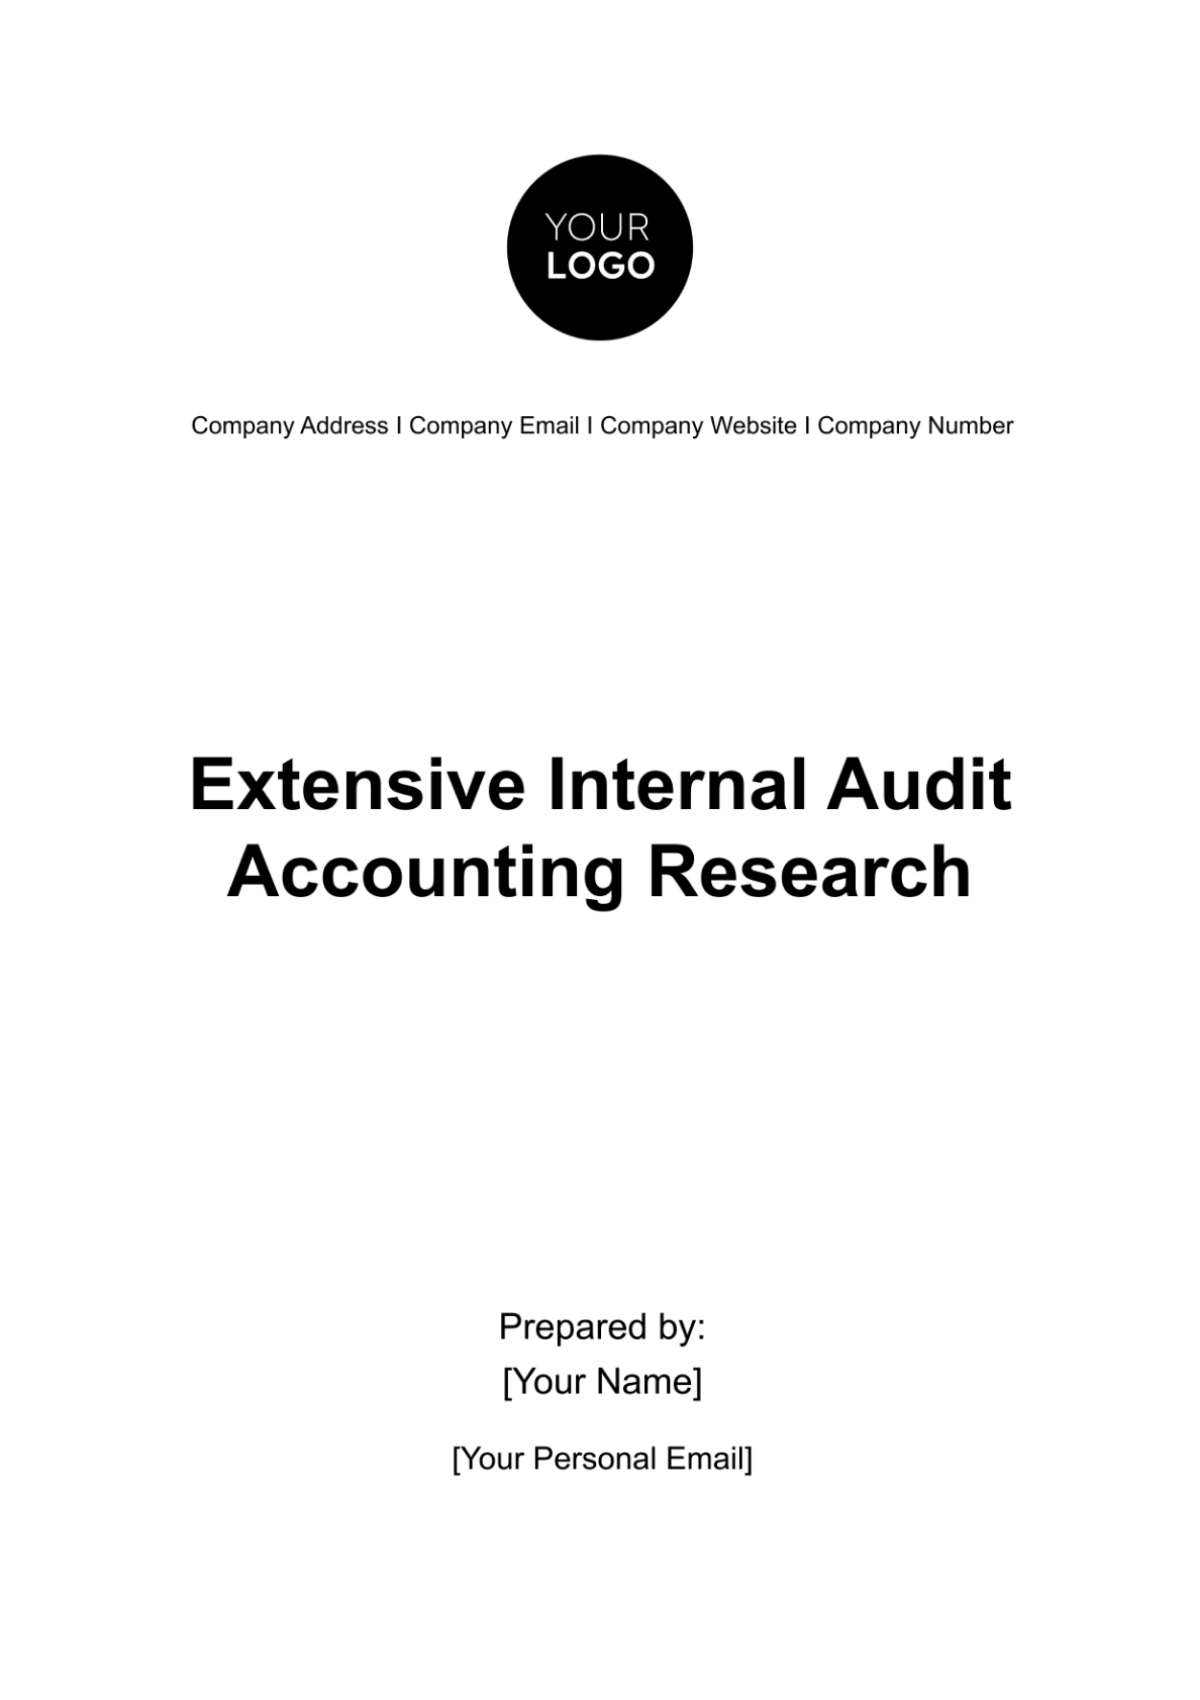 Free Extensive Internal Audit Accounting Research Template